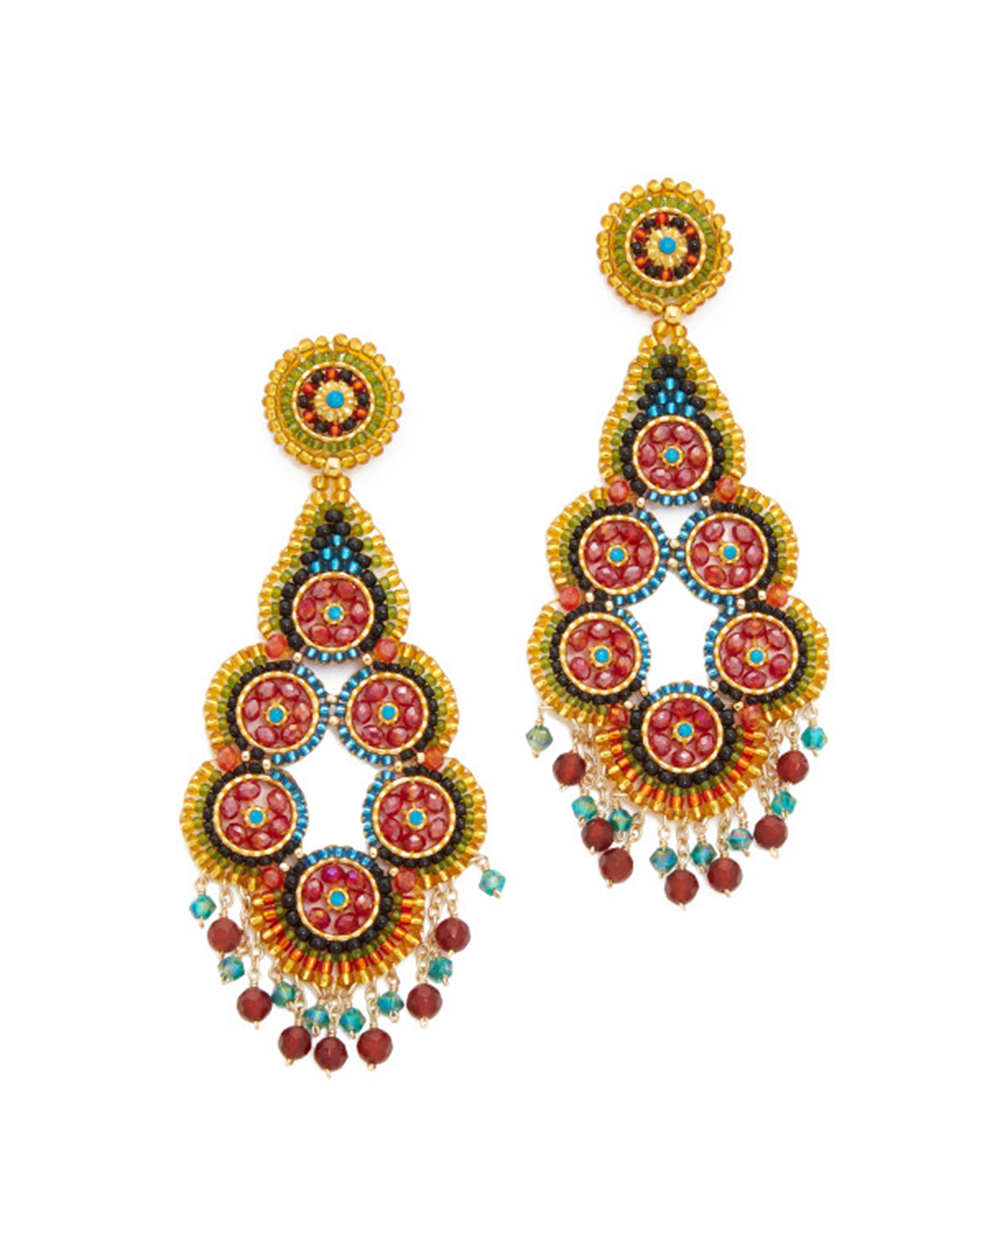 Miguel Ases earrings, $512, from Shop Bob.